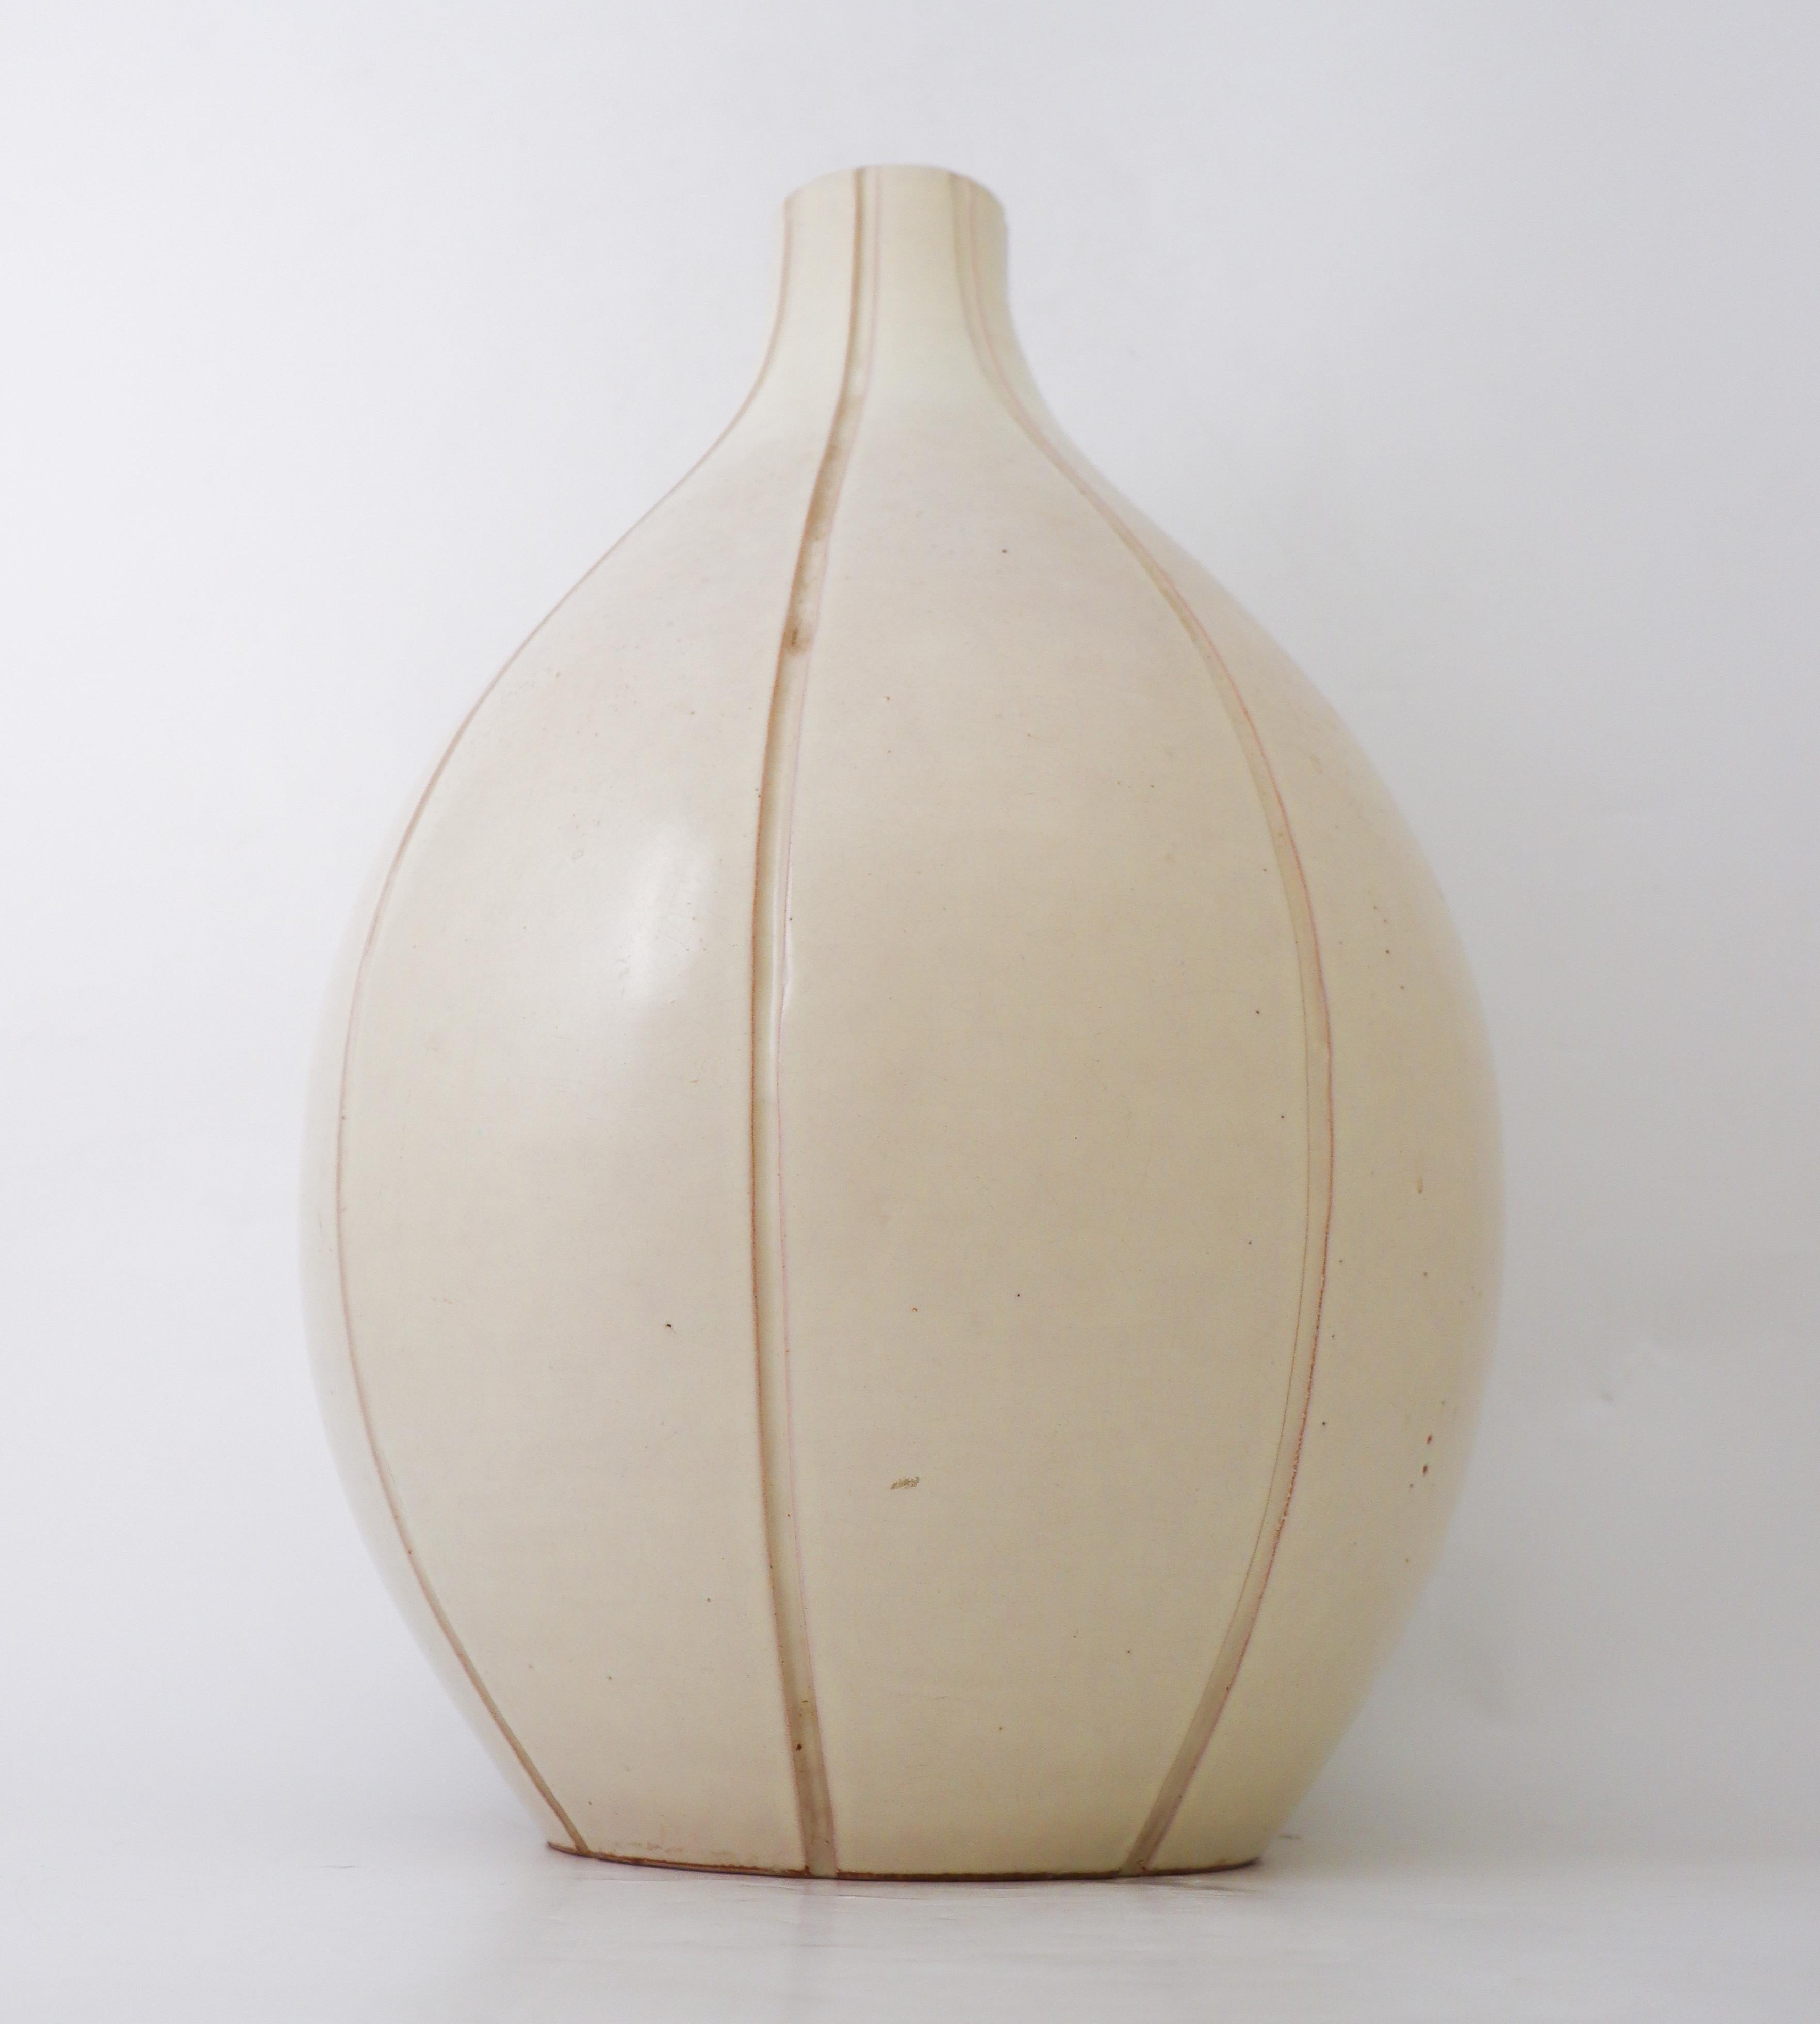 A large creme-colored floor vase designed by Erik Ivarsson at Andersson & Johansson in Höganäs, Sweden. The vase is 47 cm high and in excellent condition except from a minor un-glazed mark in the glaze from the production.